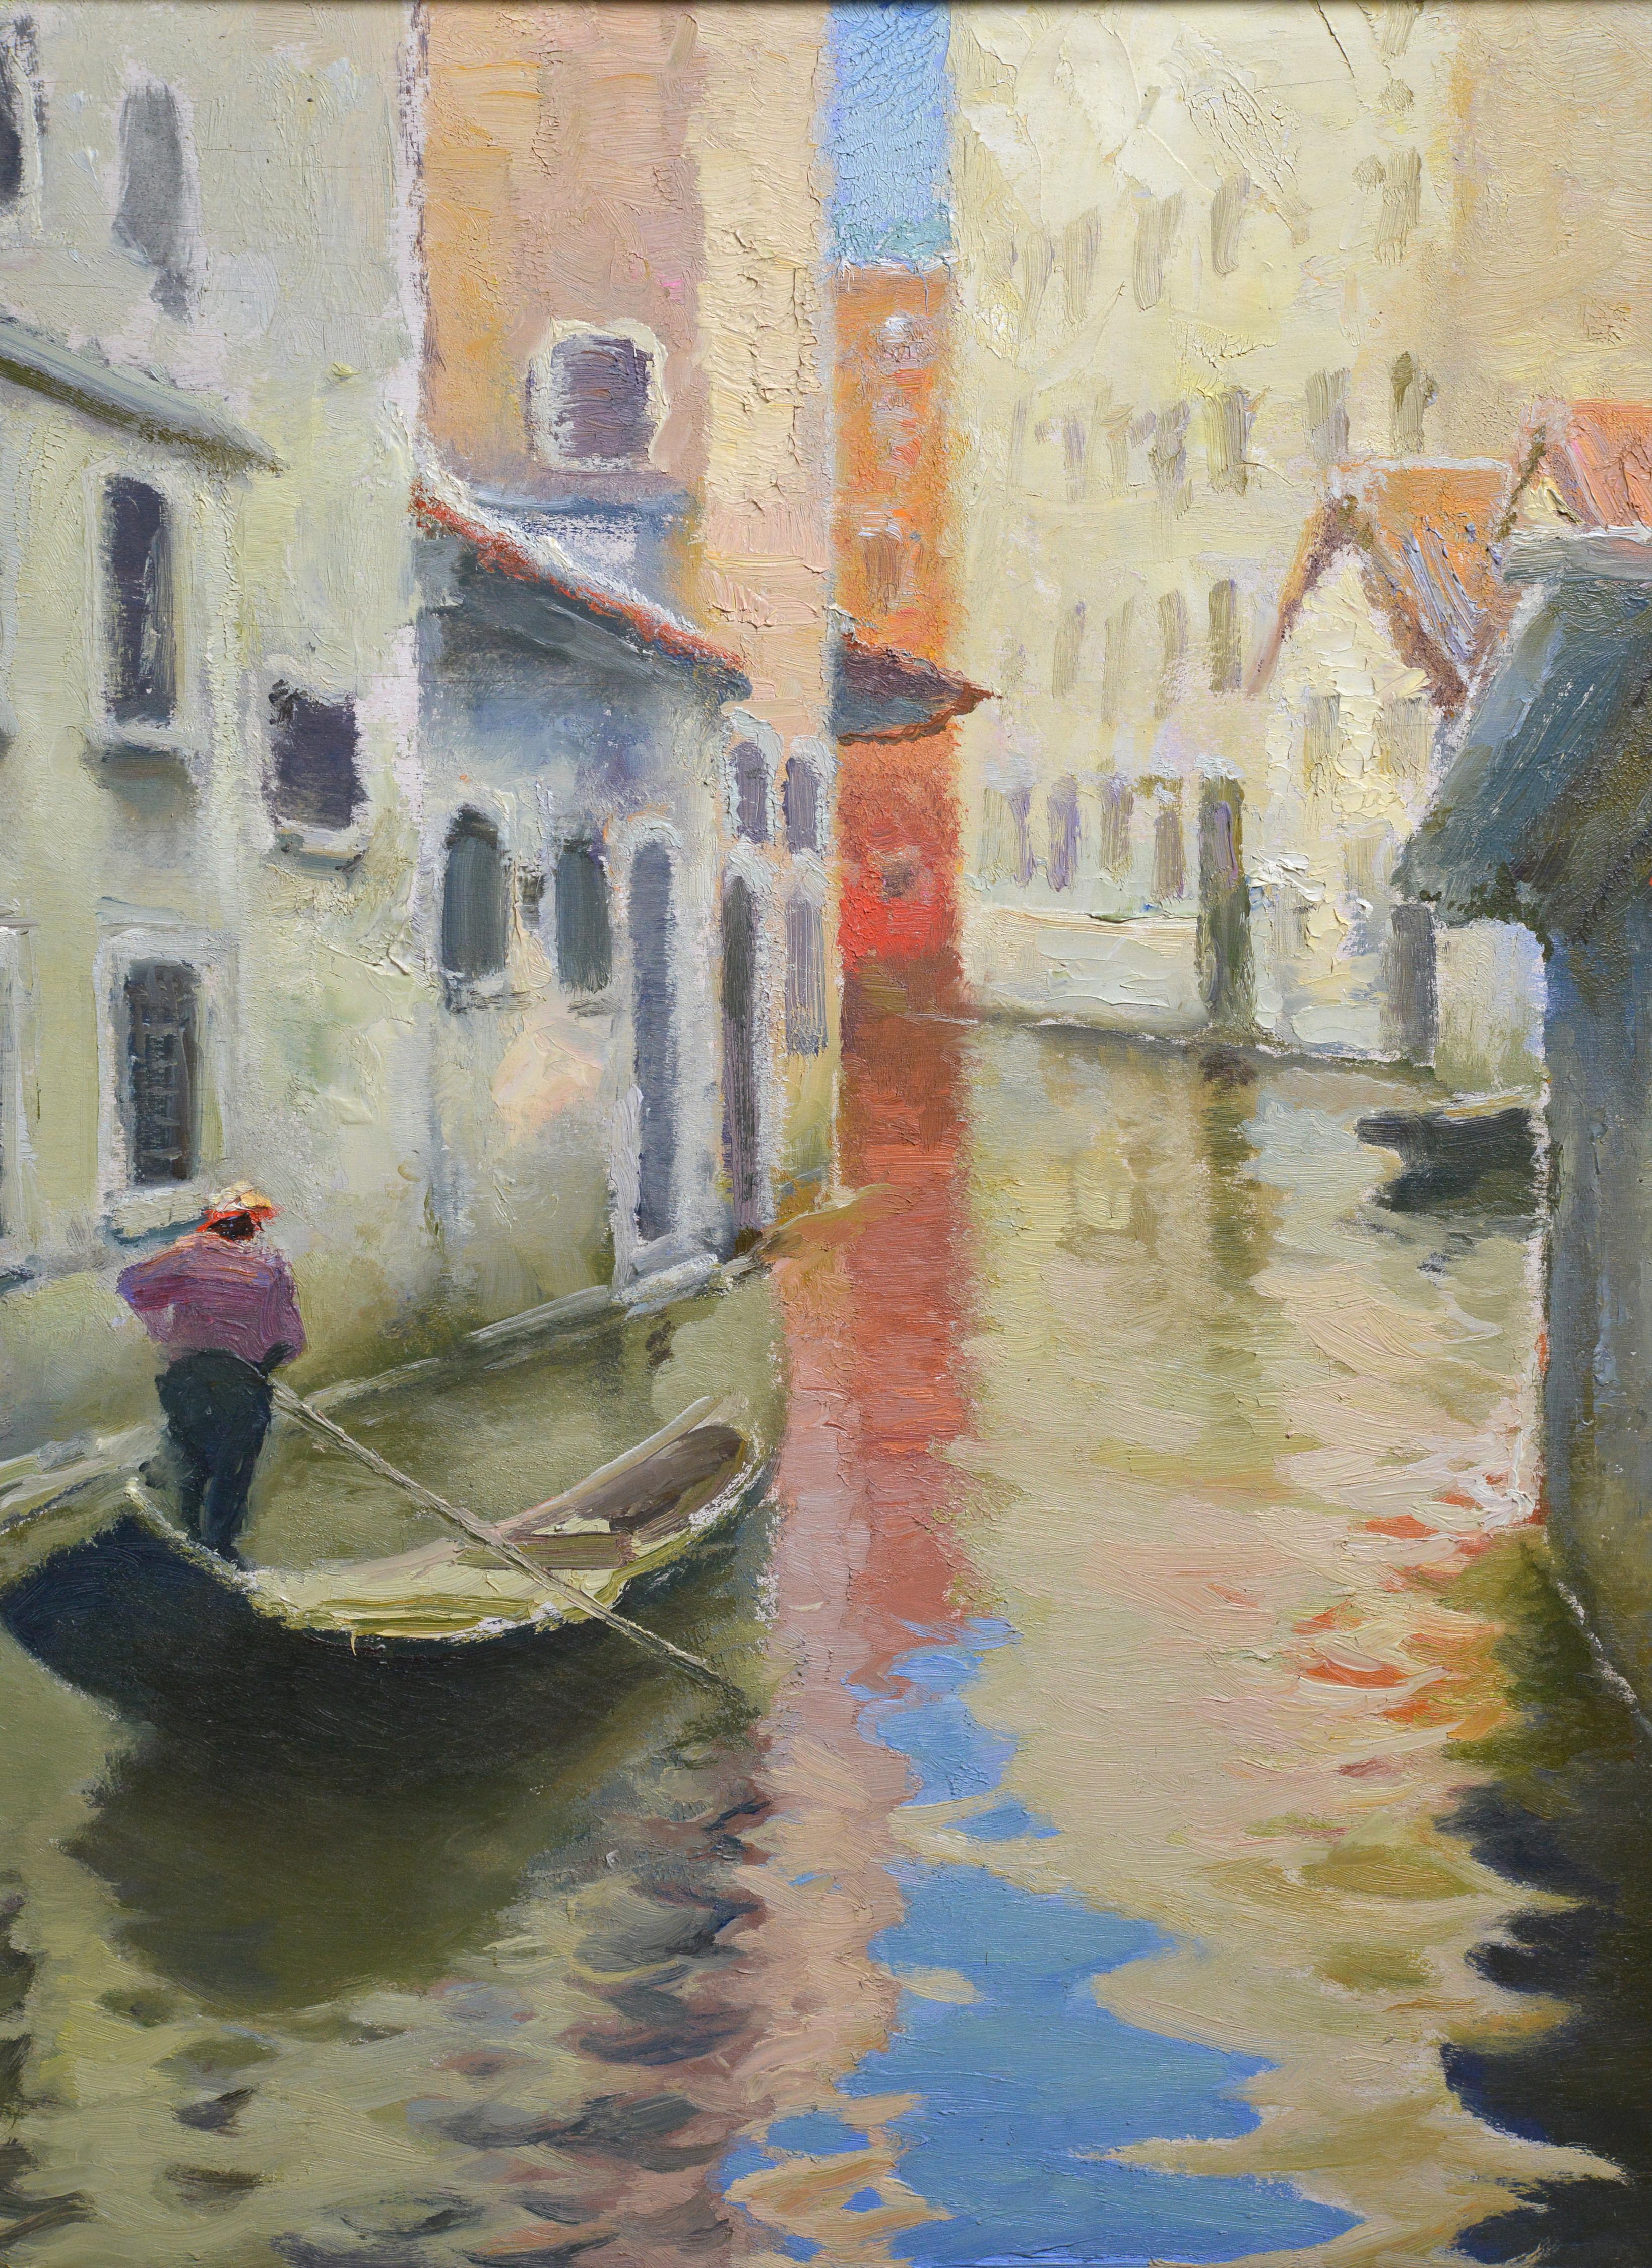 Signed lower left: Vasily (Wilhelm) Filippovich Levi (1878 - 1954). The uncommon view of Venice was depicted by gifted artist in even more modernism manner than his other works of same period. IMO this one worth special acceptance being very rare